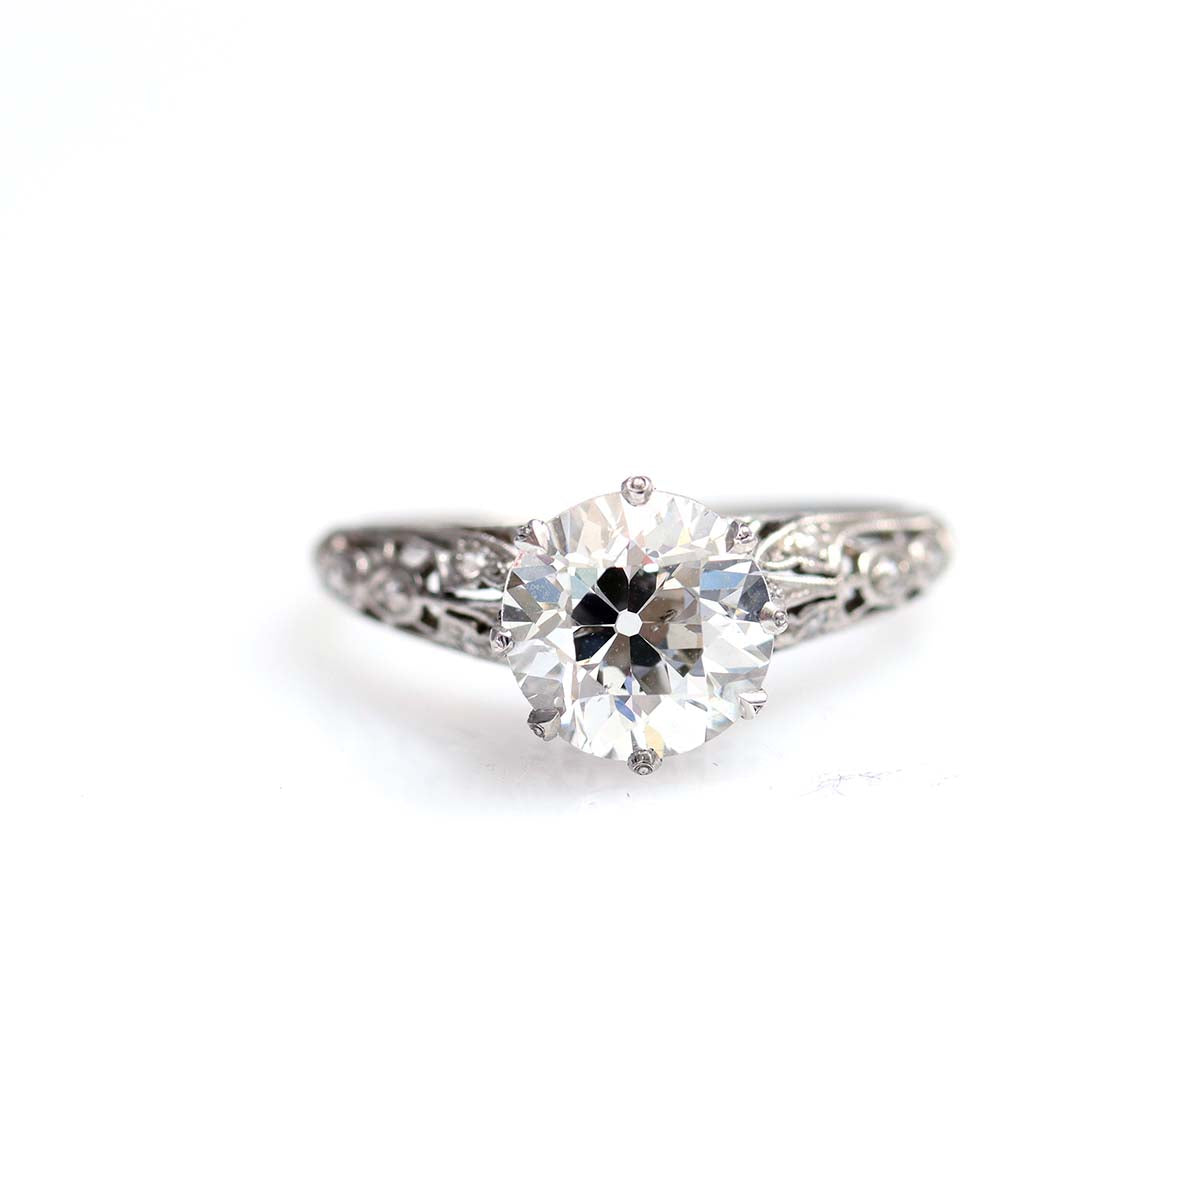 Early Art Deco Engagement Ring #VR210816-2